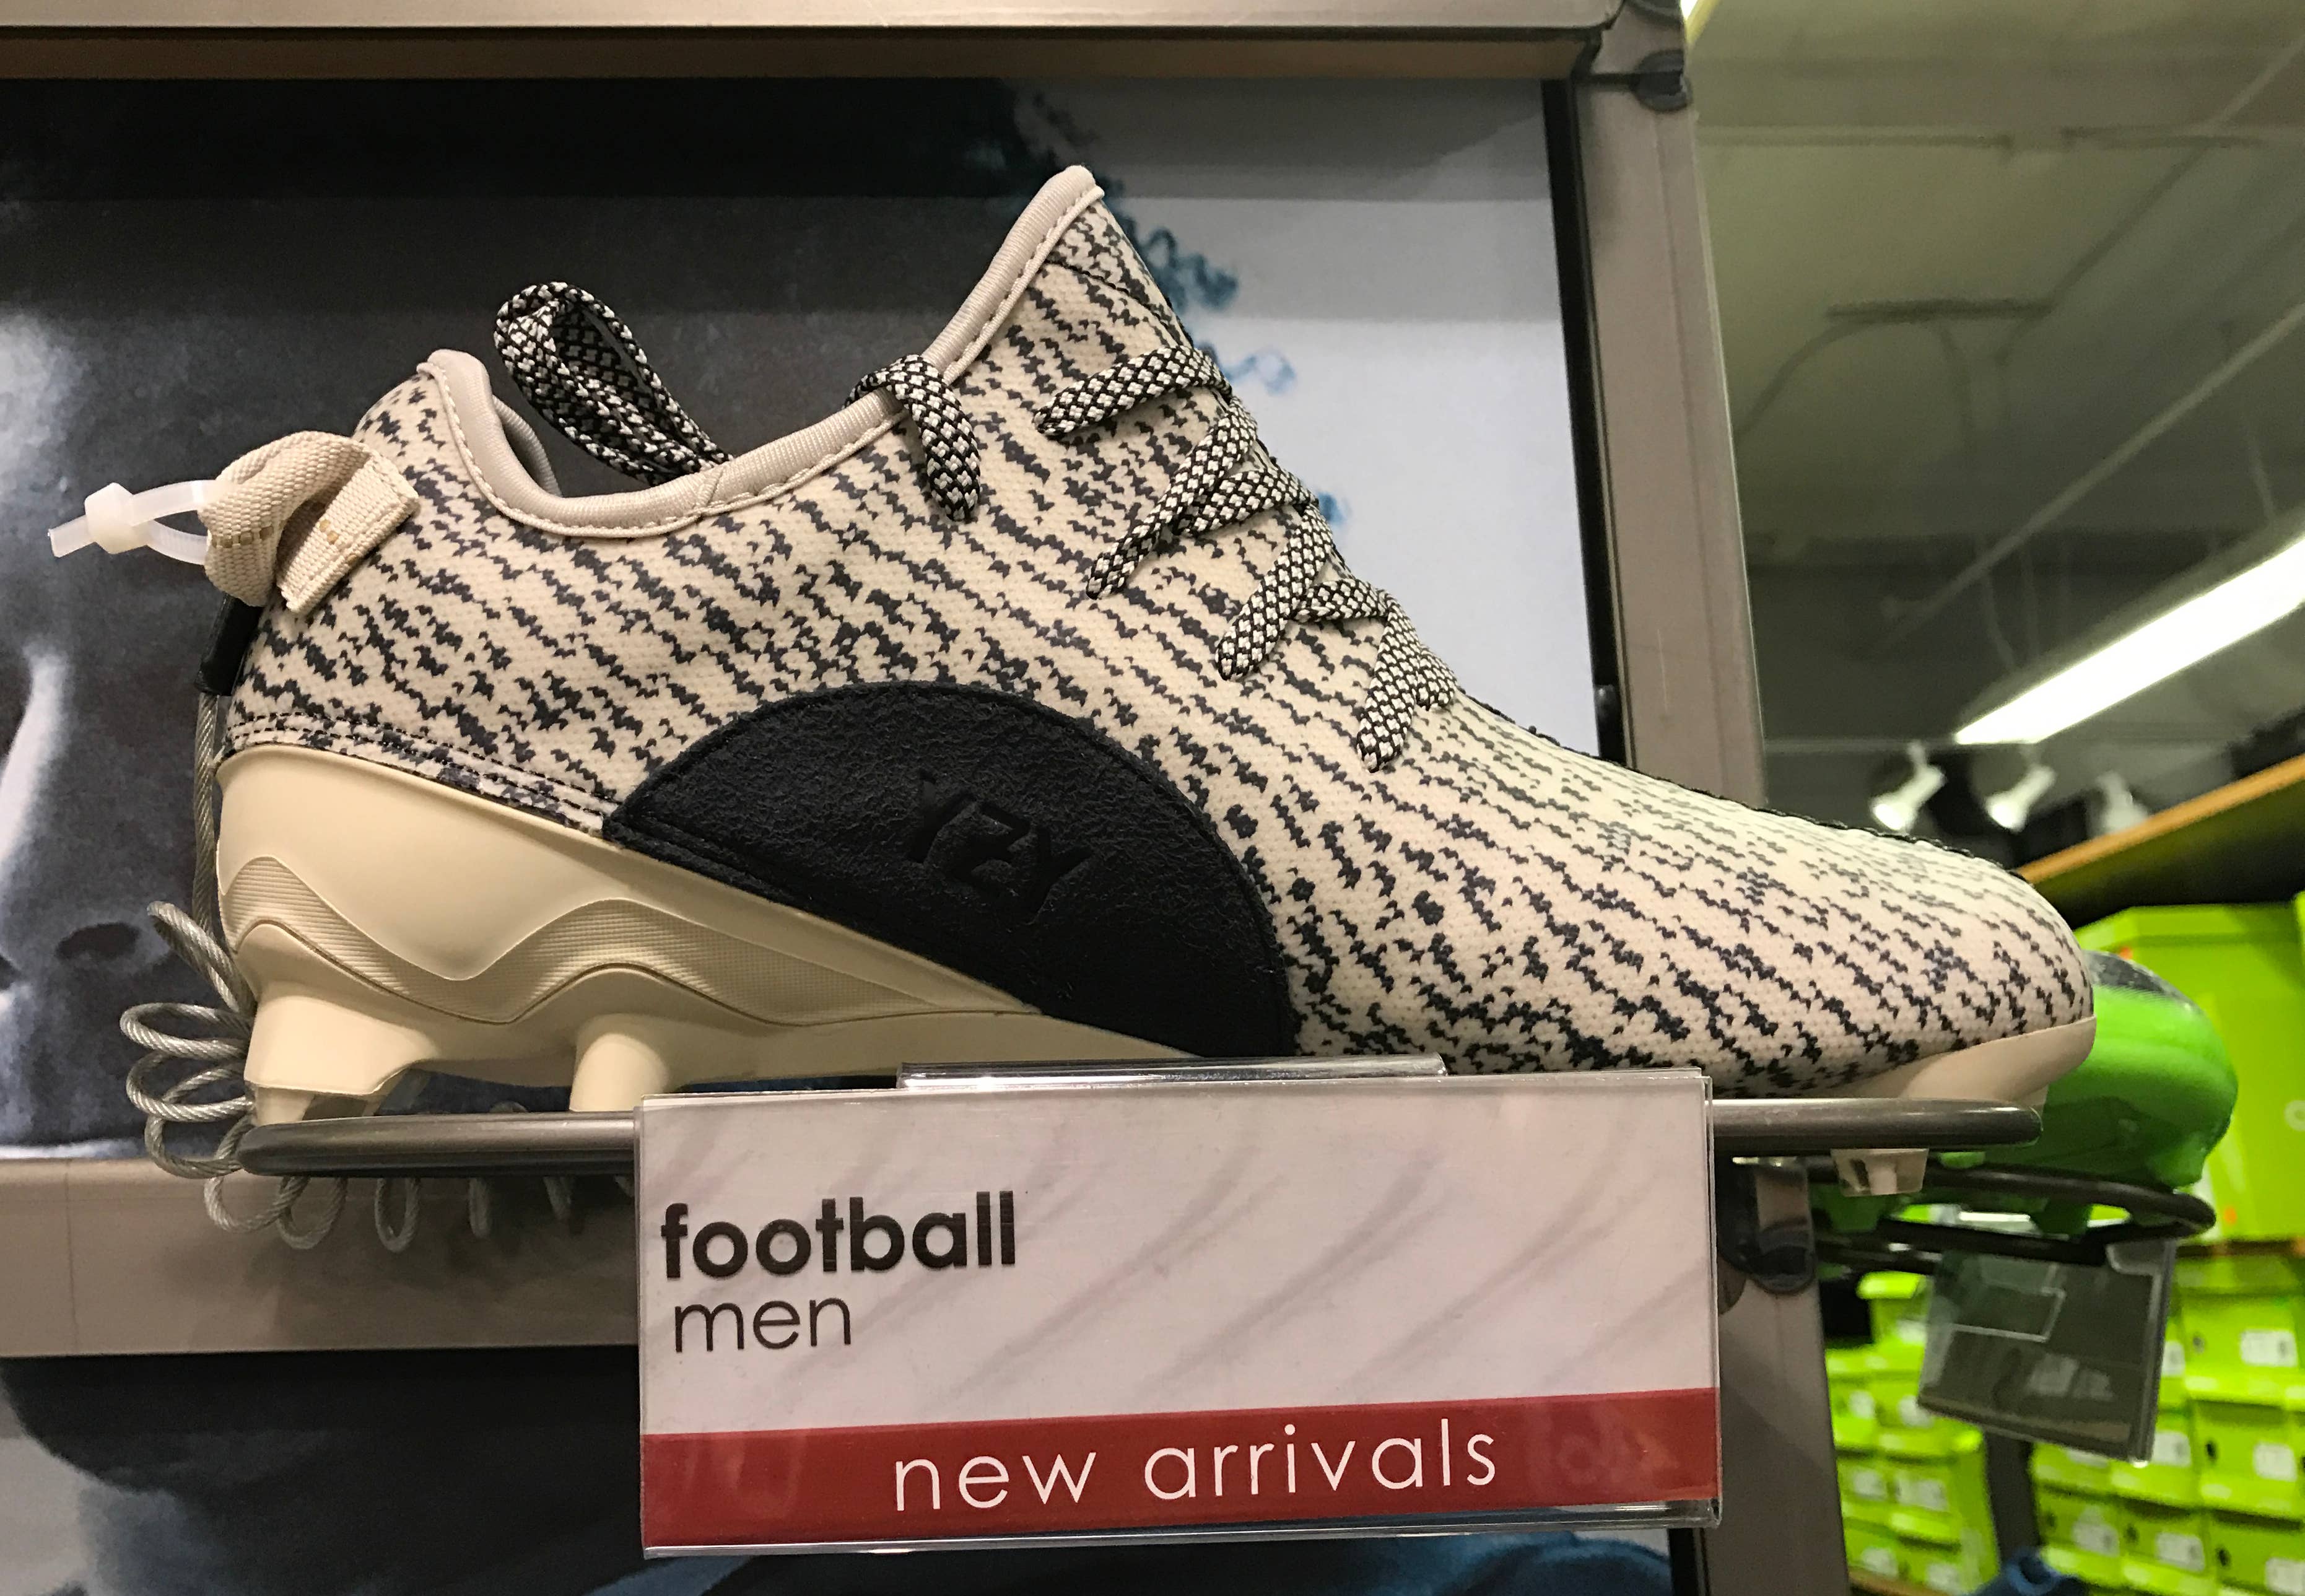 Yeezy Cleats Spotted at Outlet | Complex